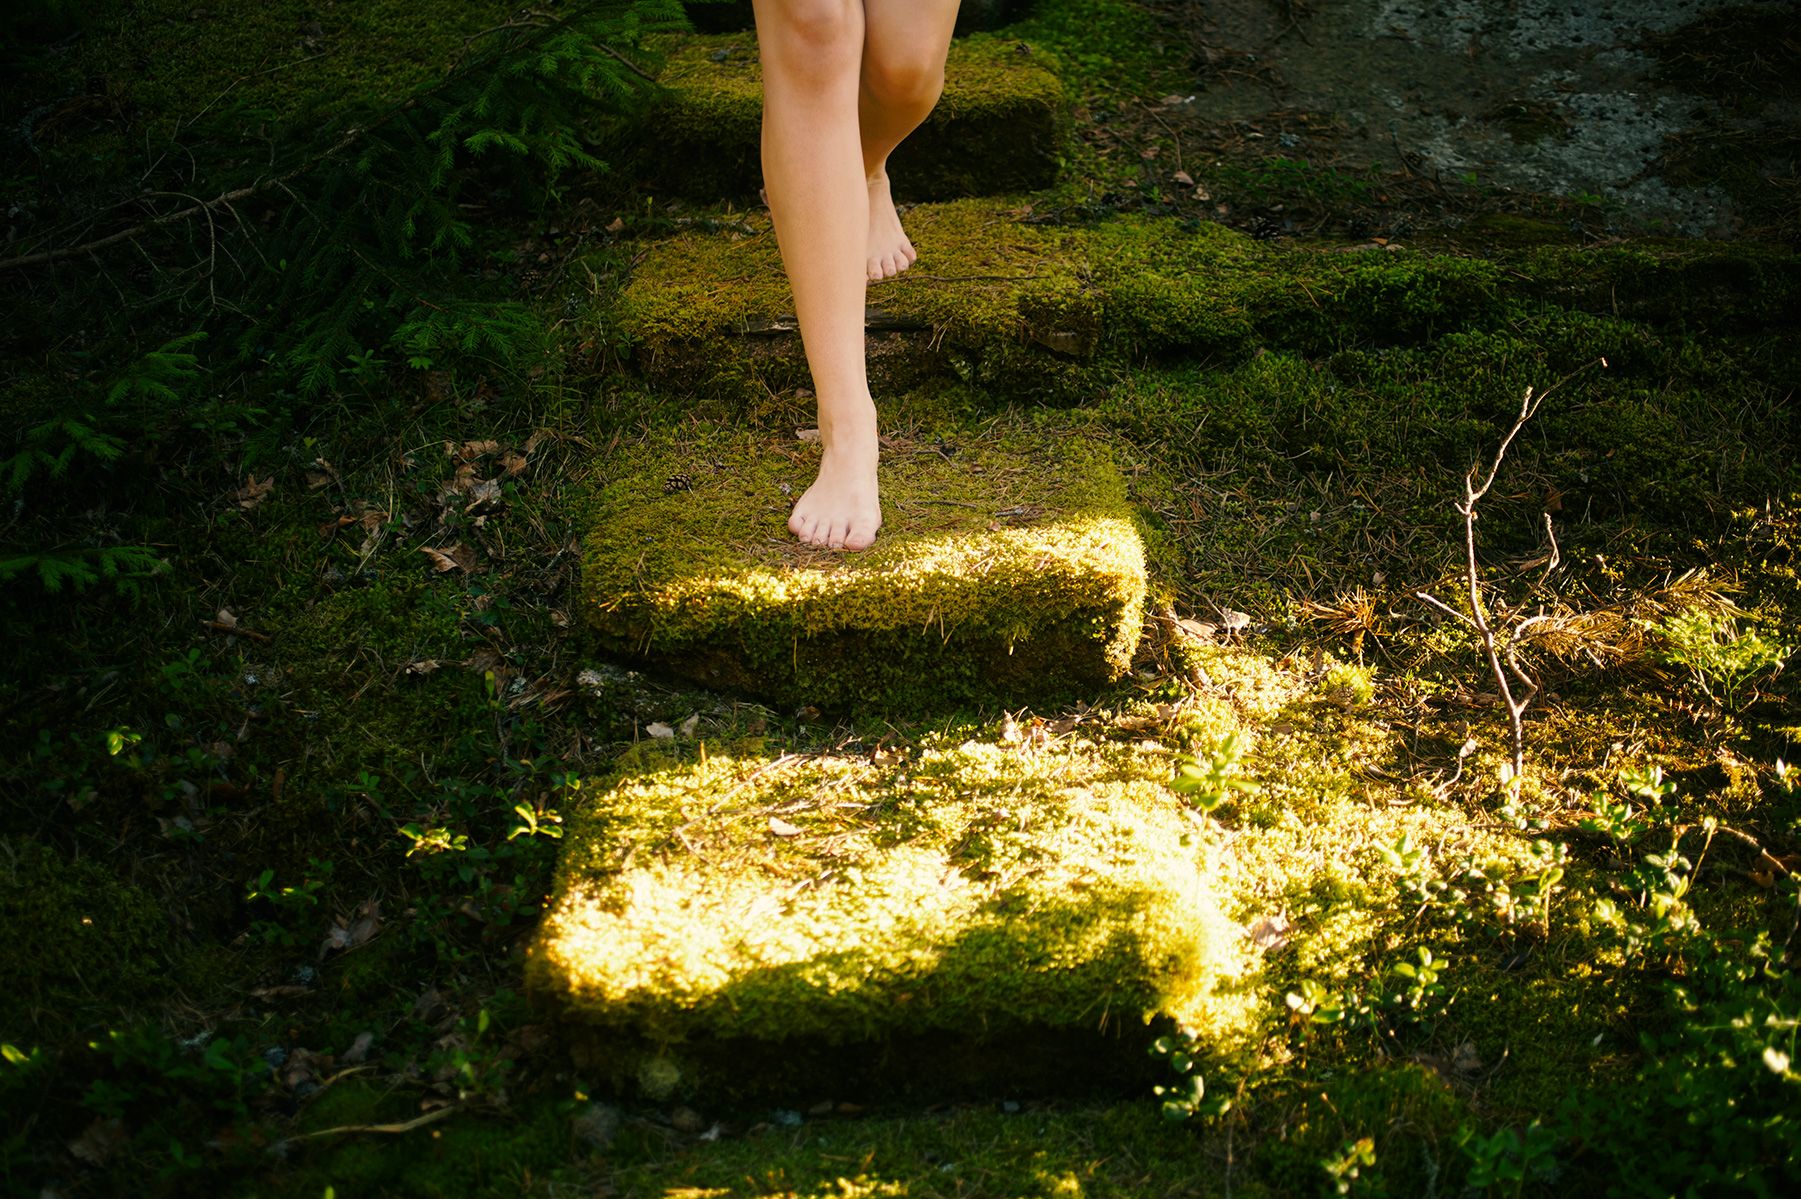 A person's legs stepping on moss-covered stones in the forest.